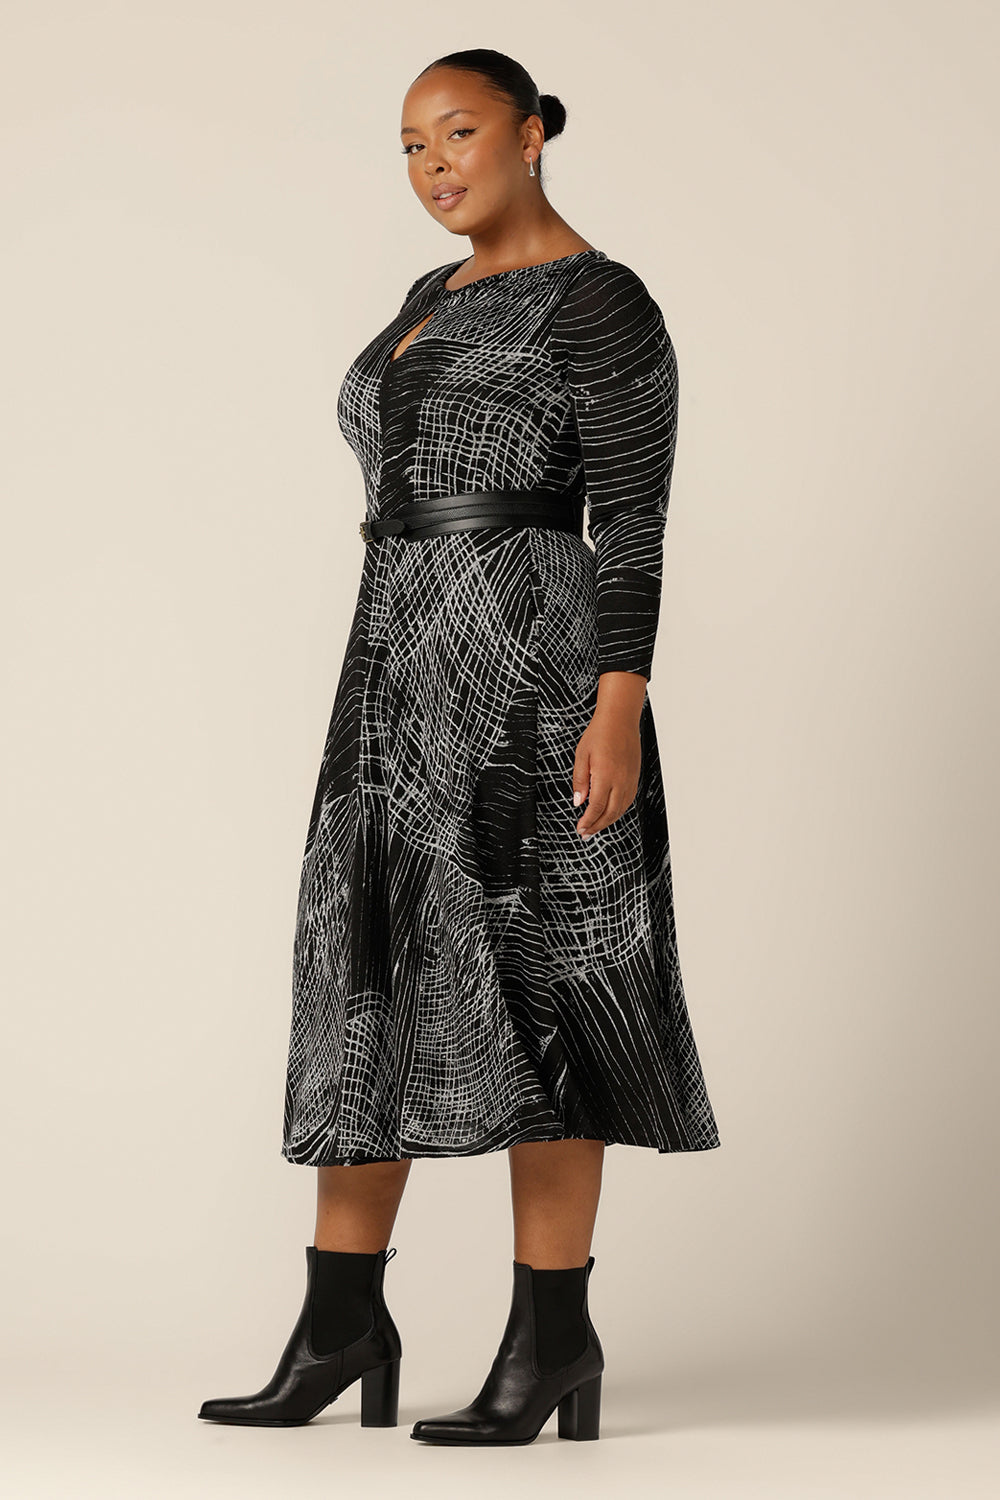 A good dress for plus size, fuller figure women, the Sandee Dress by Australian and New Zealand women's clothing company L&F is well-fitting in a stretch knit fabric. A midi length, long sleeve dress with twisted keyhole detail, this is an Australian-made dress available to buy in an inclusive size range of 8 to 24.